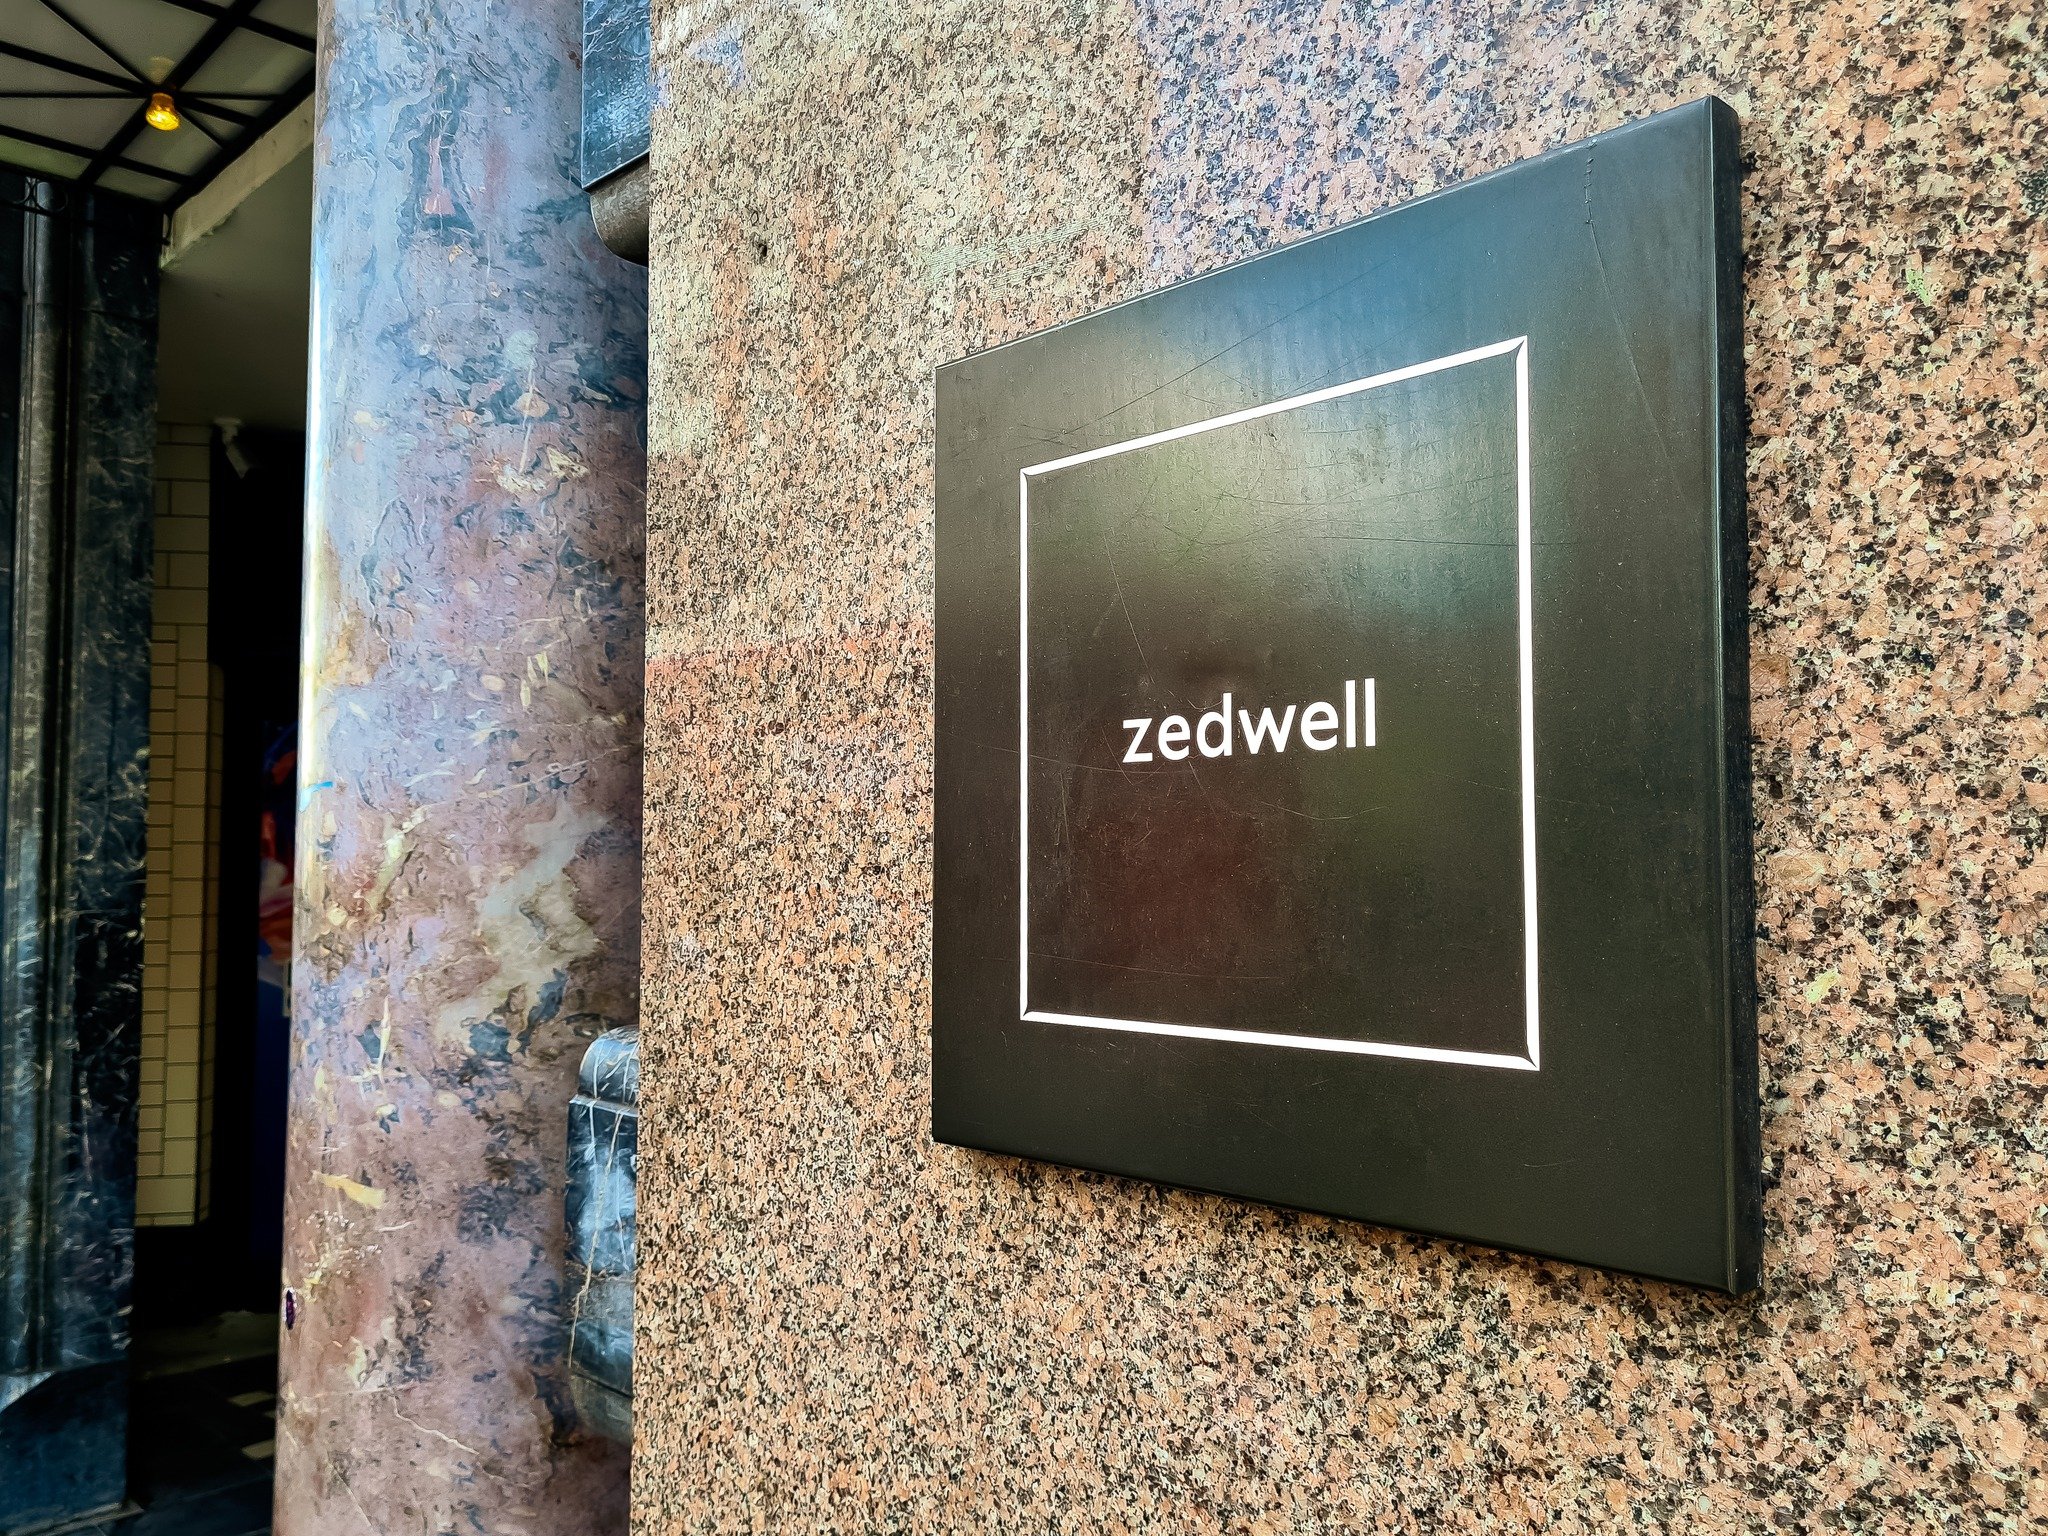 zedwell hotel piccadilly circus outside.jpg